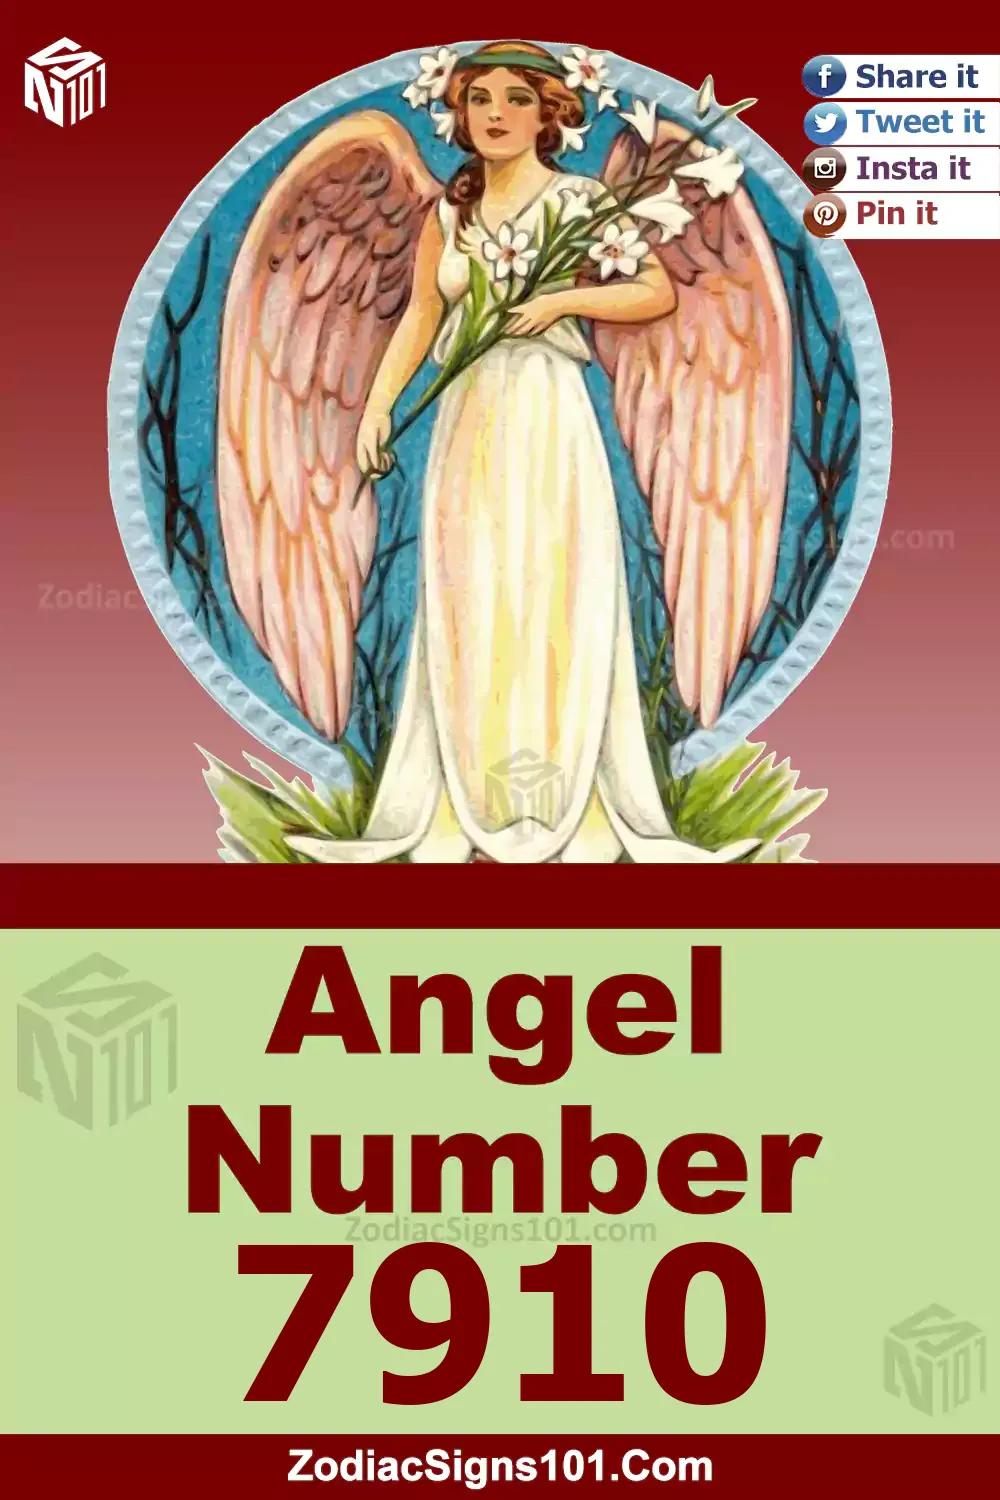 7910 Angel Number Meaning